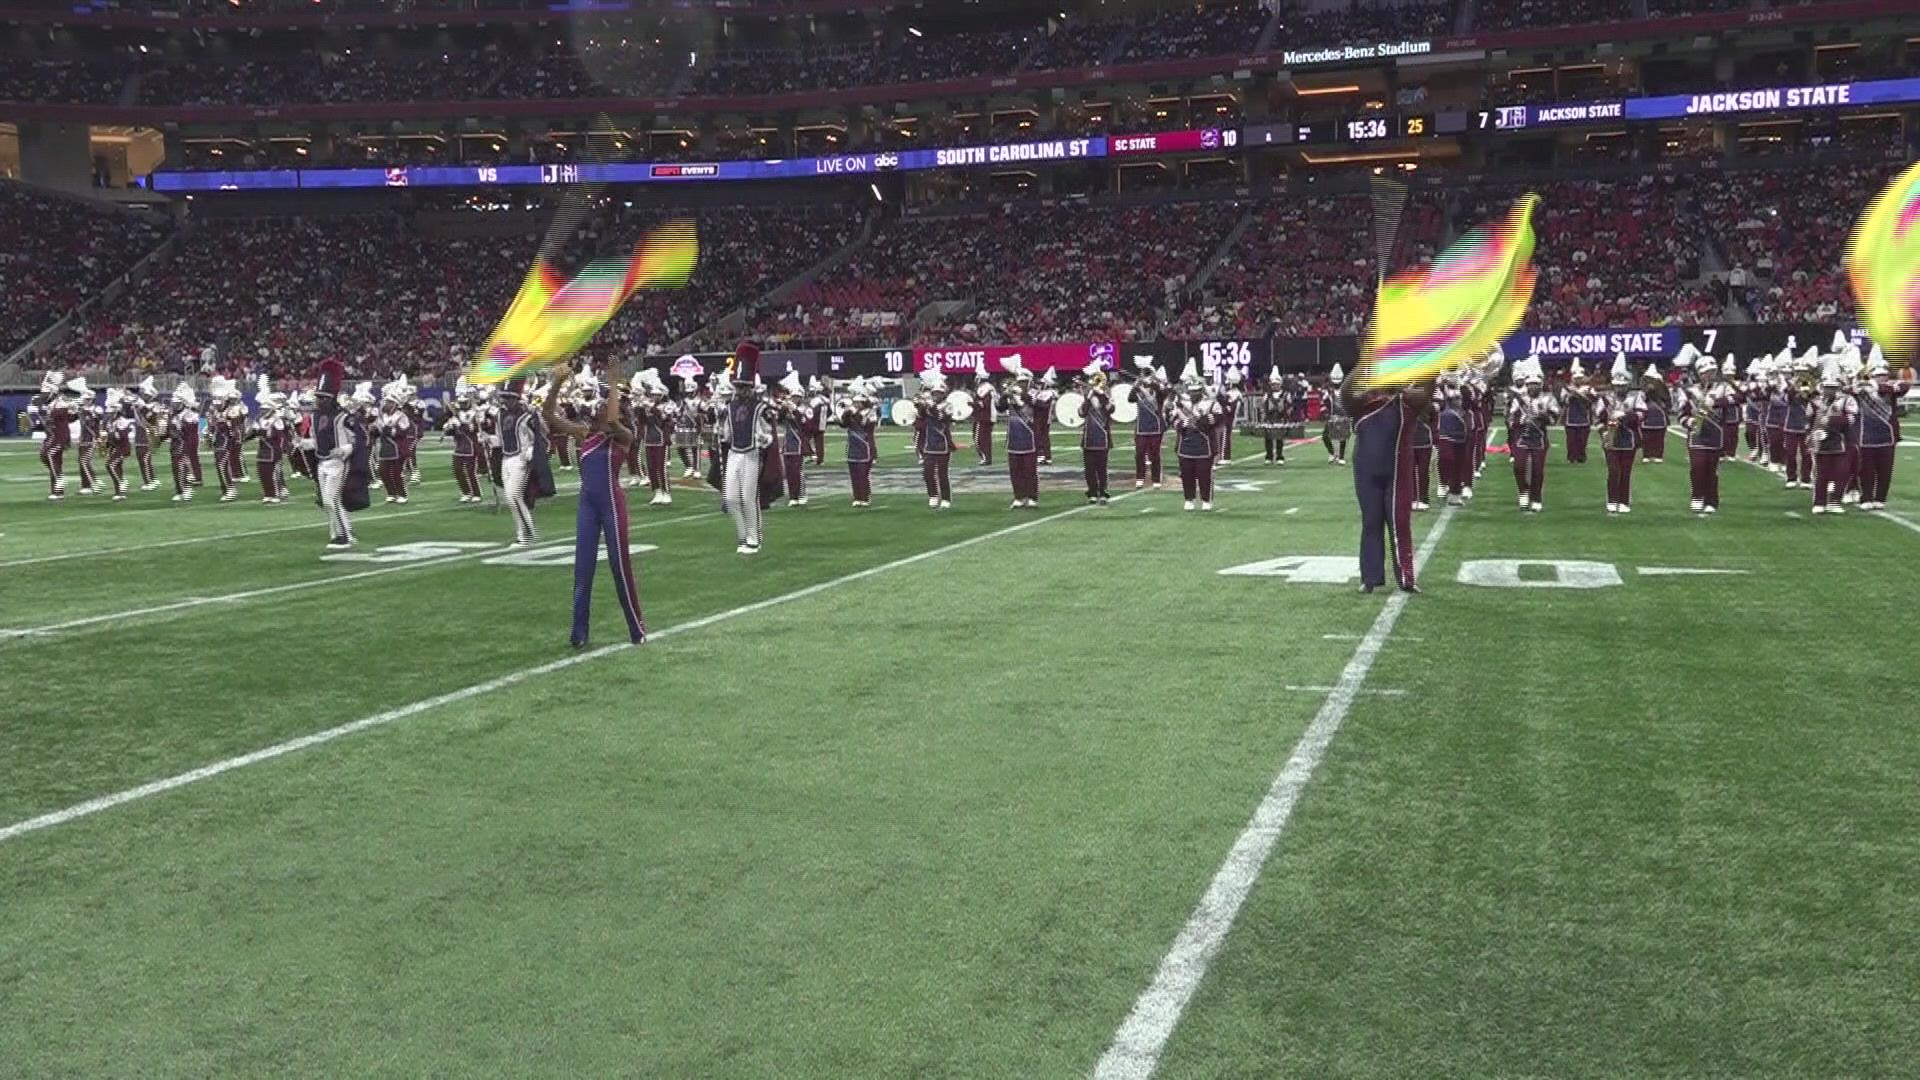 At halftime of the Celebration Bowl in Atlanta, the marching bands for South Carolina State and Jackson State performed for the fans.